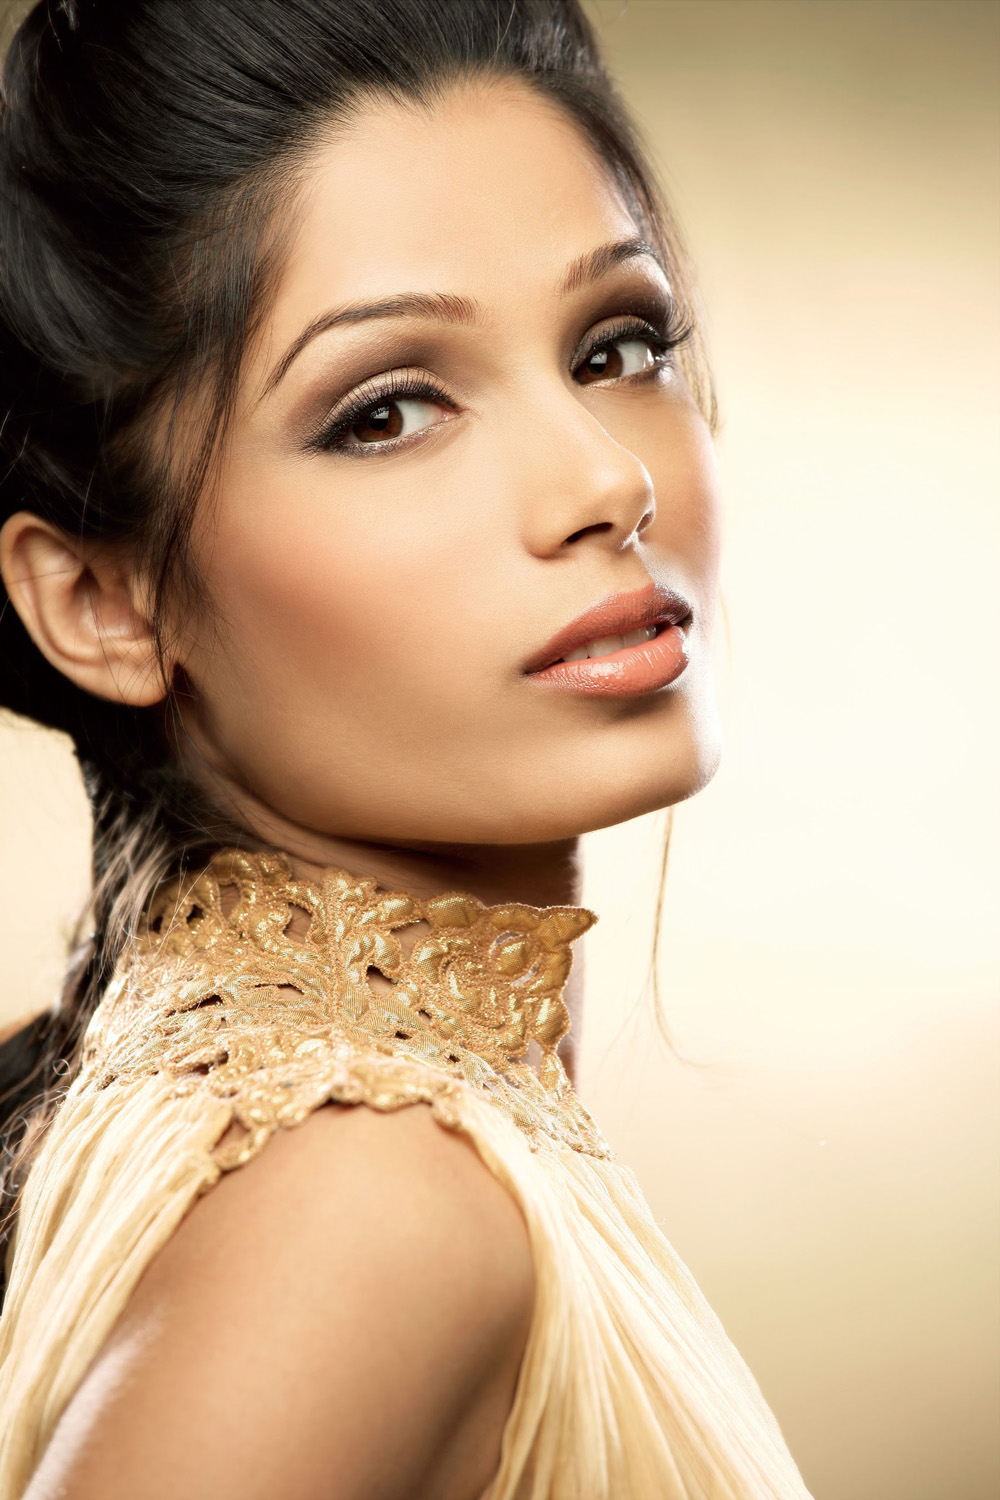 Freida Pinto and Evangeline Lilly named Spokespersons for L’Oreal Paris